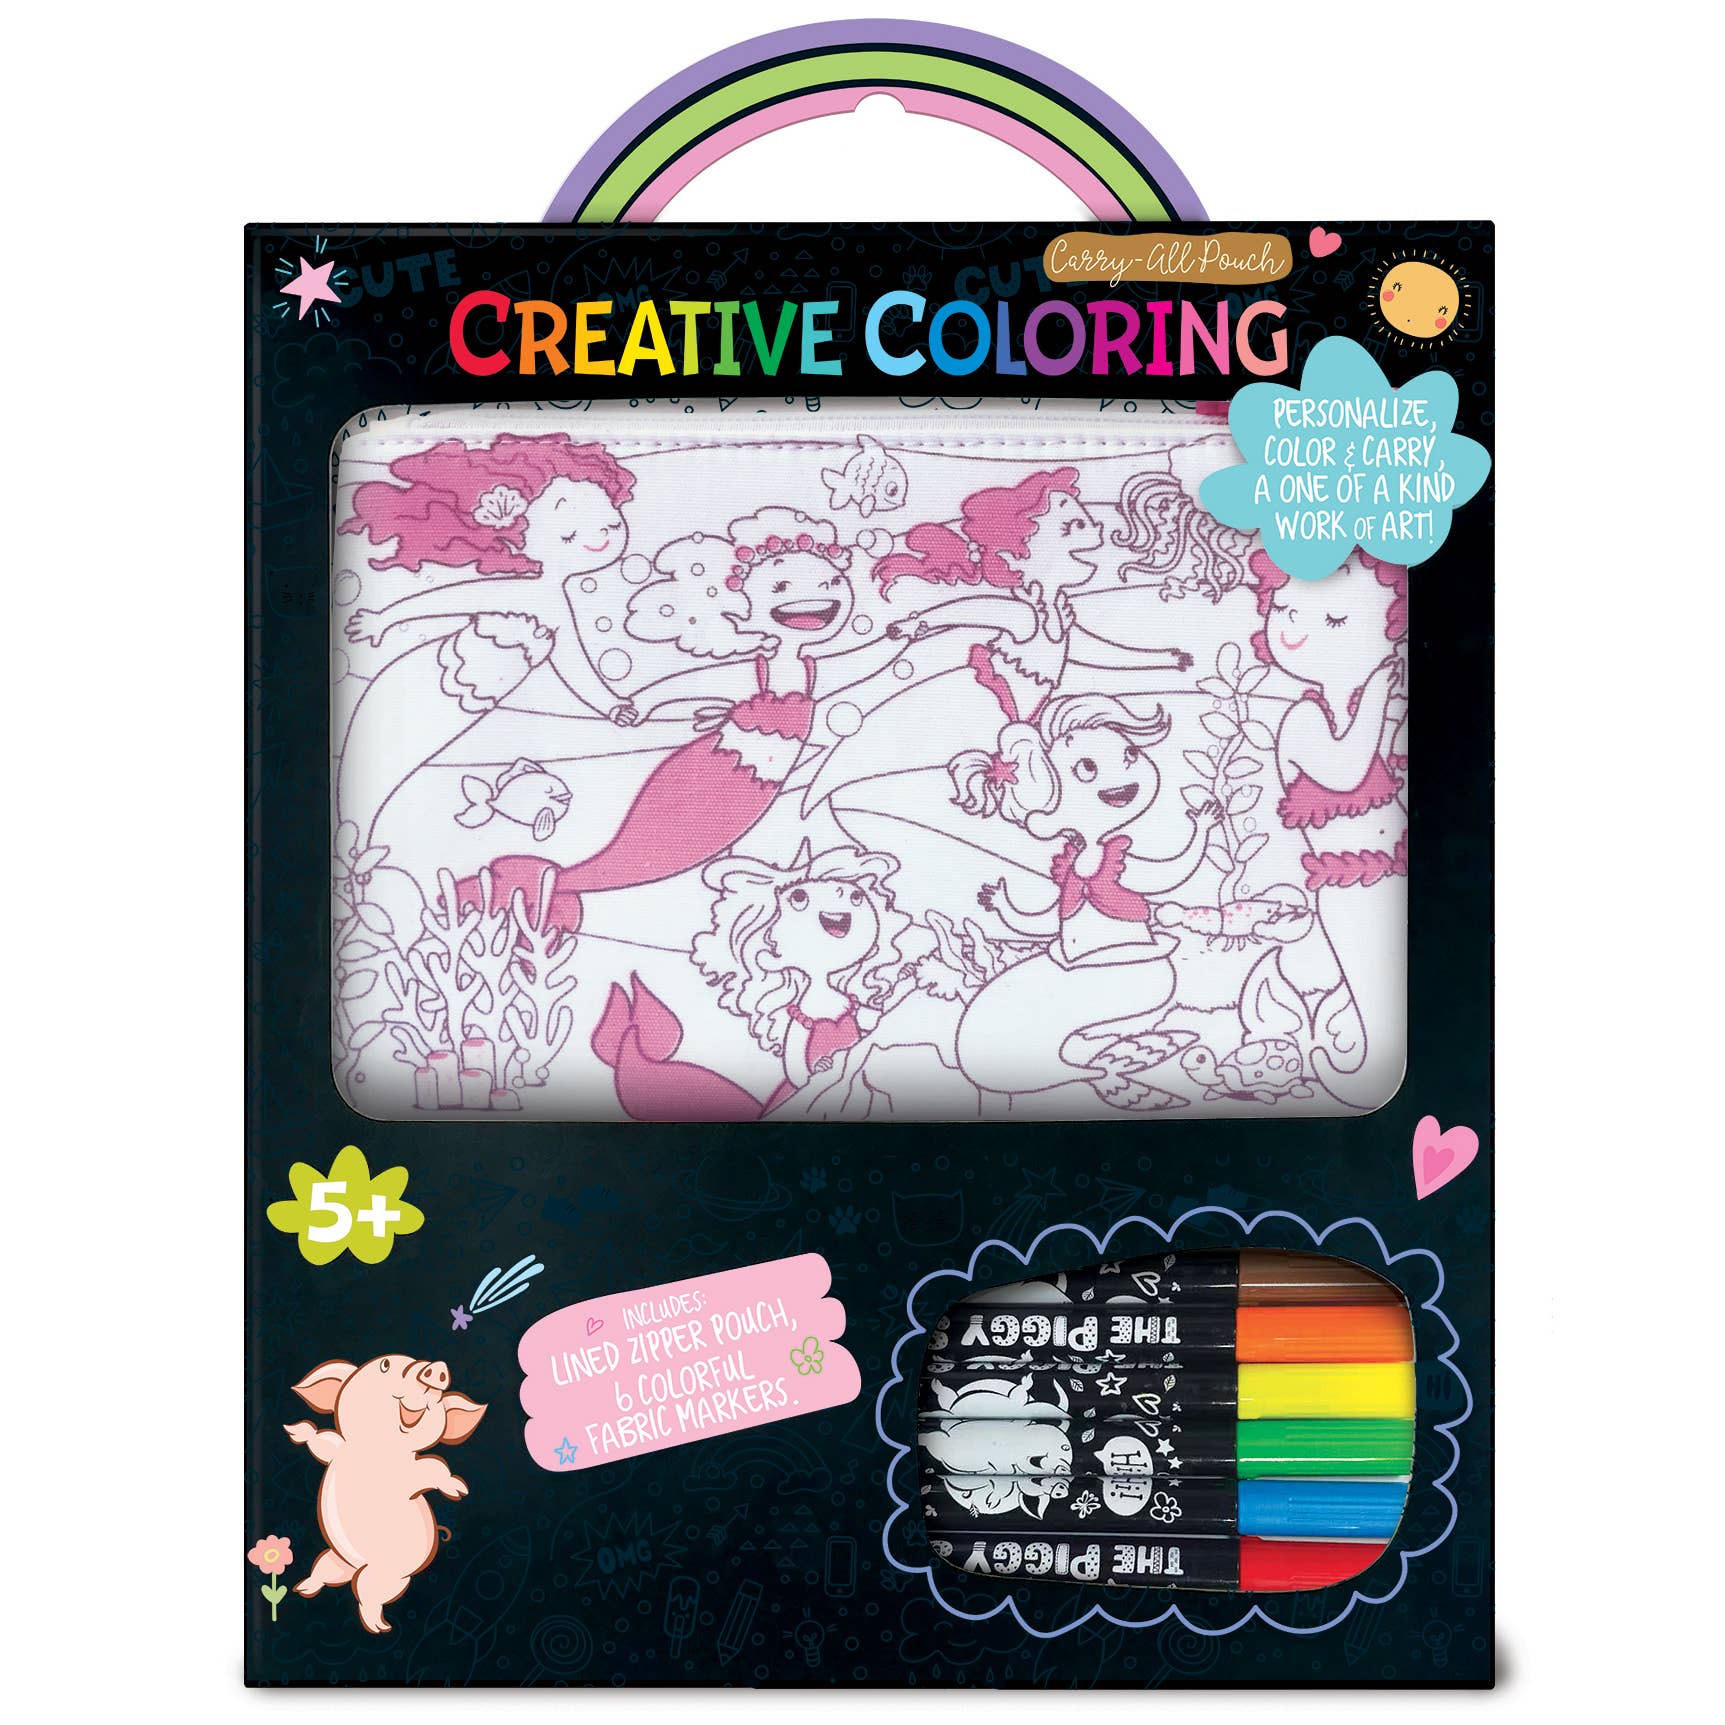 Creative Coloring: Carry All Pouch- Magical Mermaids